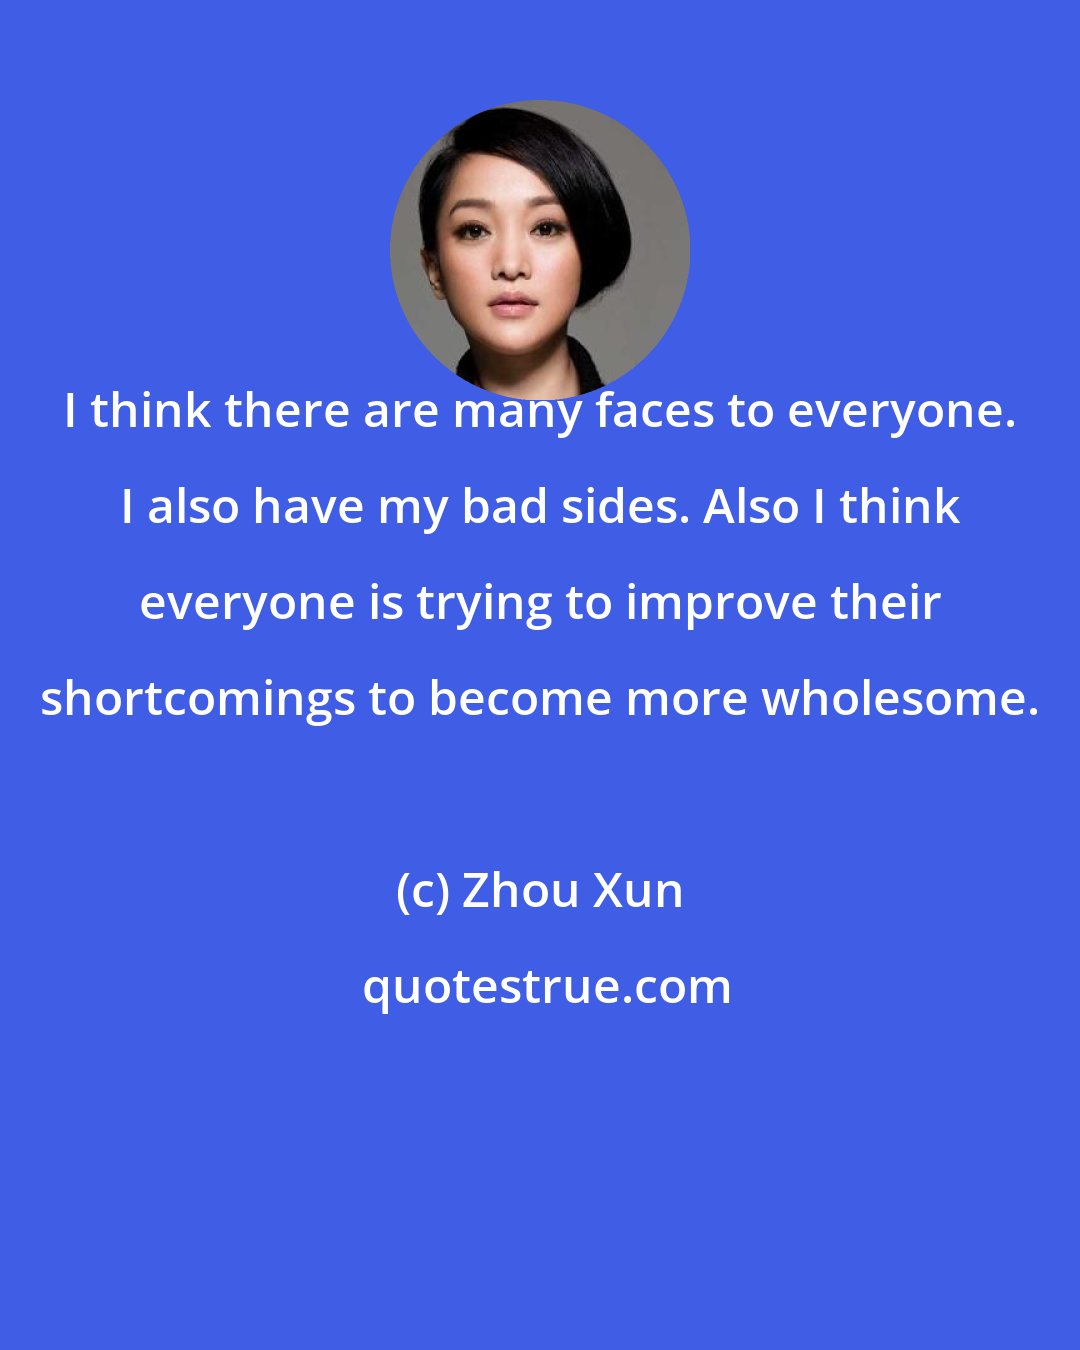 Zhou Xun: I think there are many faces to everyone. I also have my bad sides. Also I think everyone is trying to improve their shortcomings to become more wholesome.